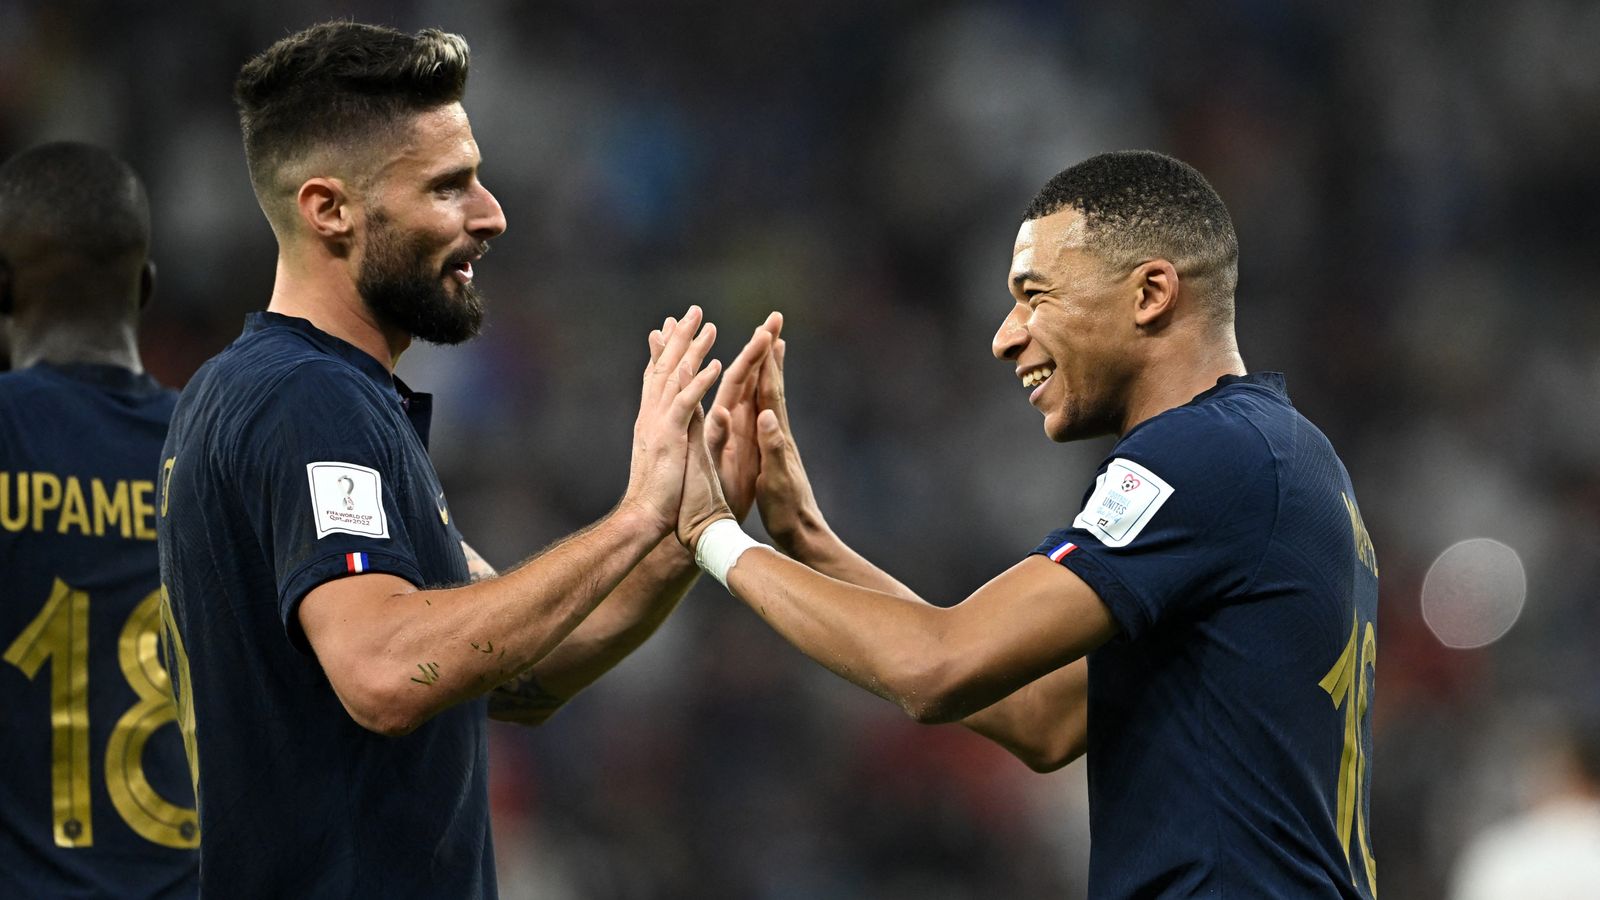 World Cup 2022: Olivier Giroud and Kylian Mbappe both break records as France reach quarter-finals | World News